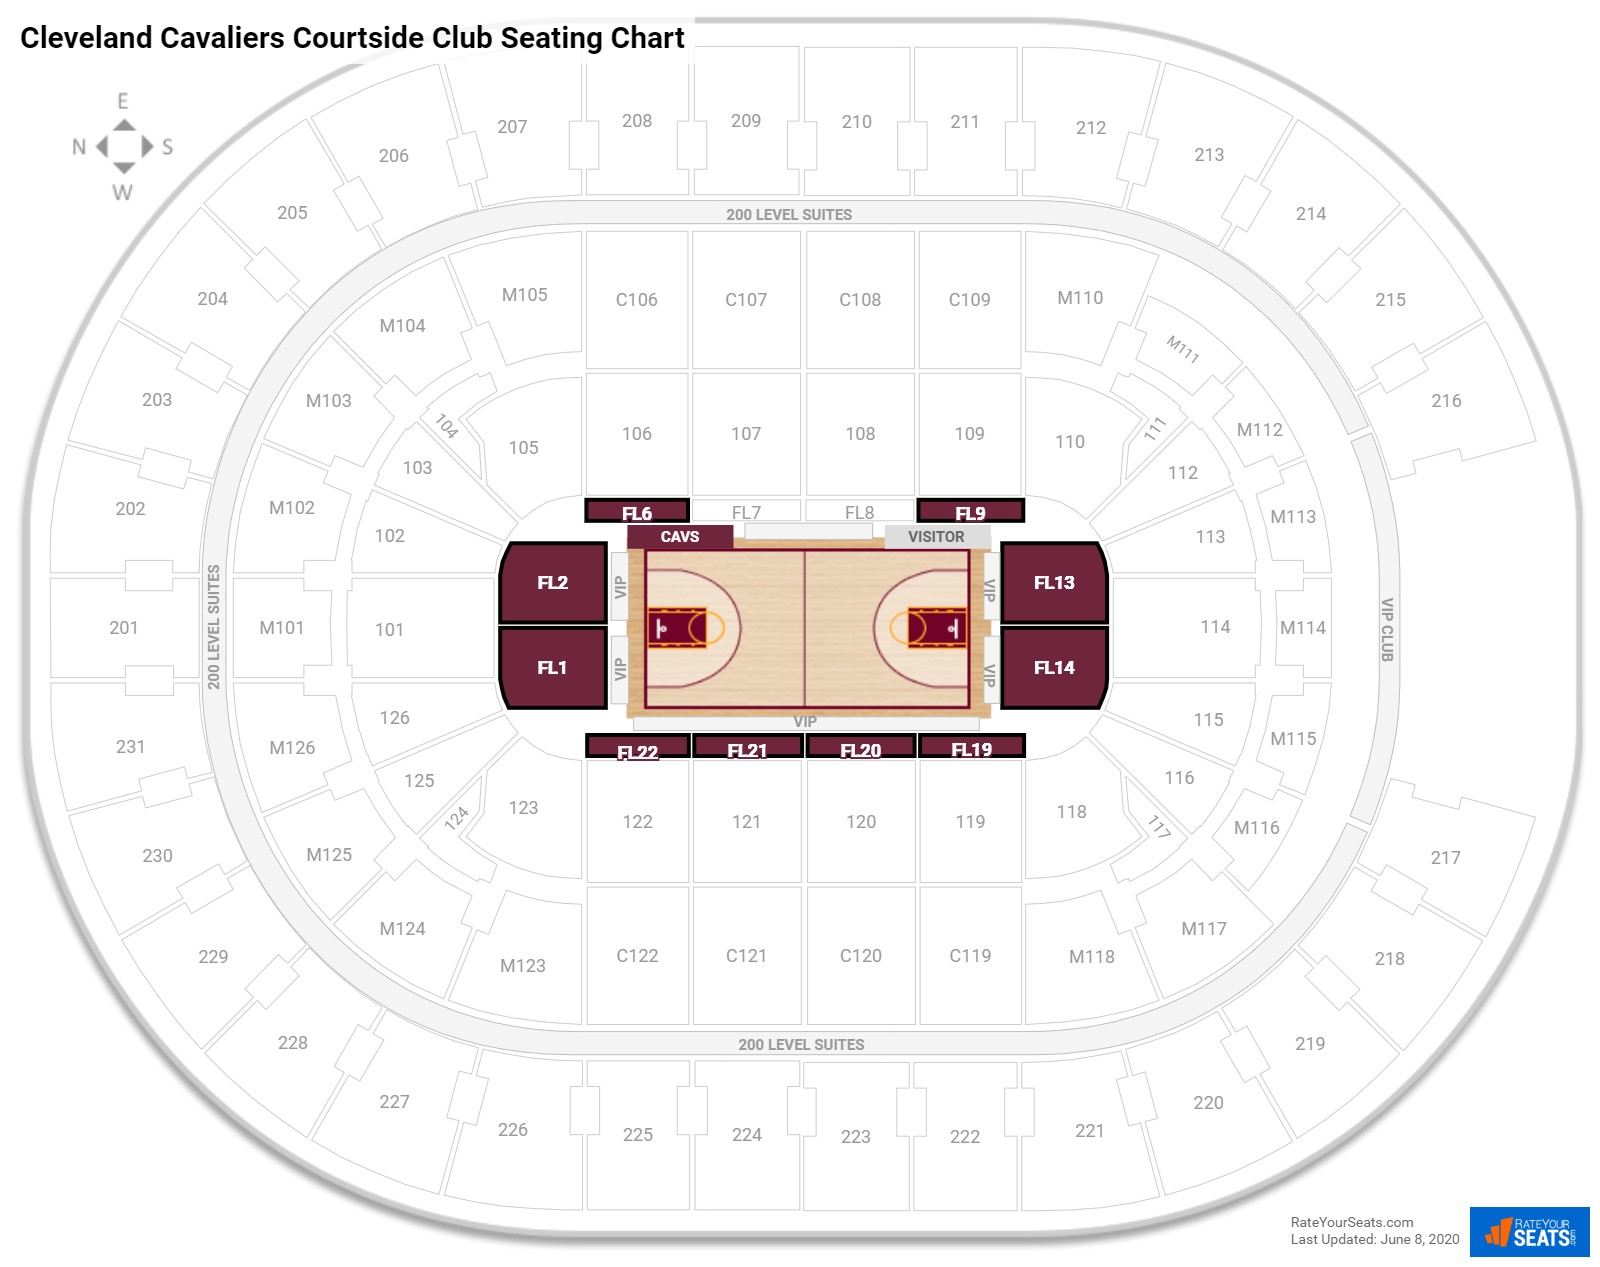 Club and Premium Seating at Quicken Loans Arena - RateYourSeats.com